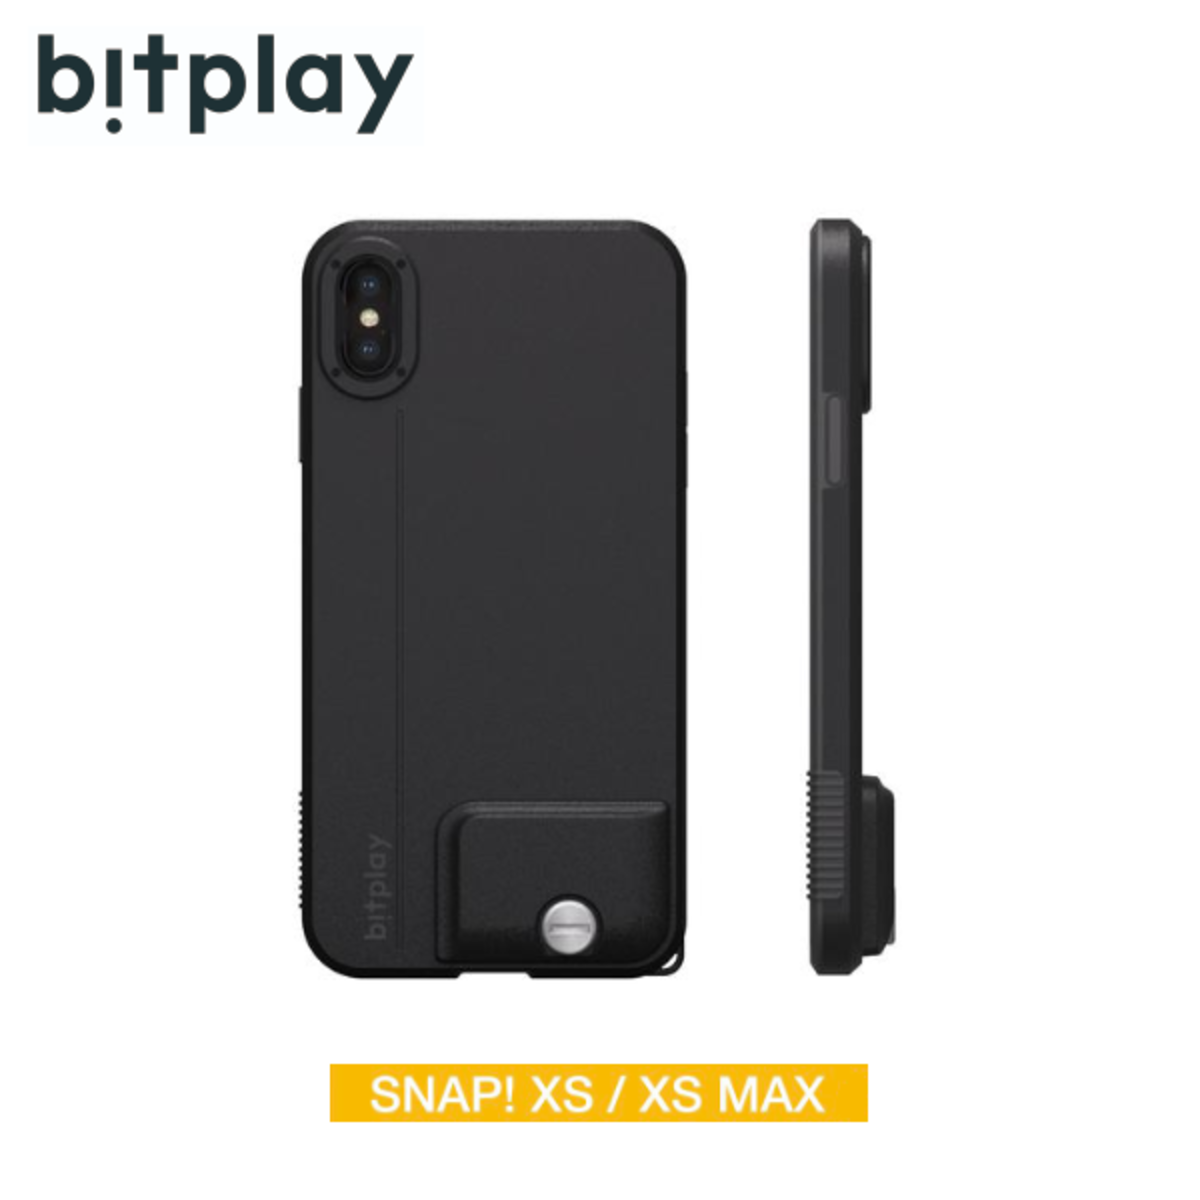 Bitplay - SNAP! iPhone XS/XS Max fully covered lightweight anti-fall camera case - black